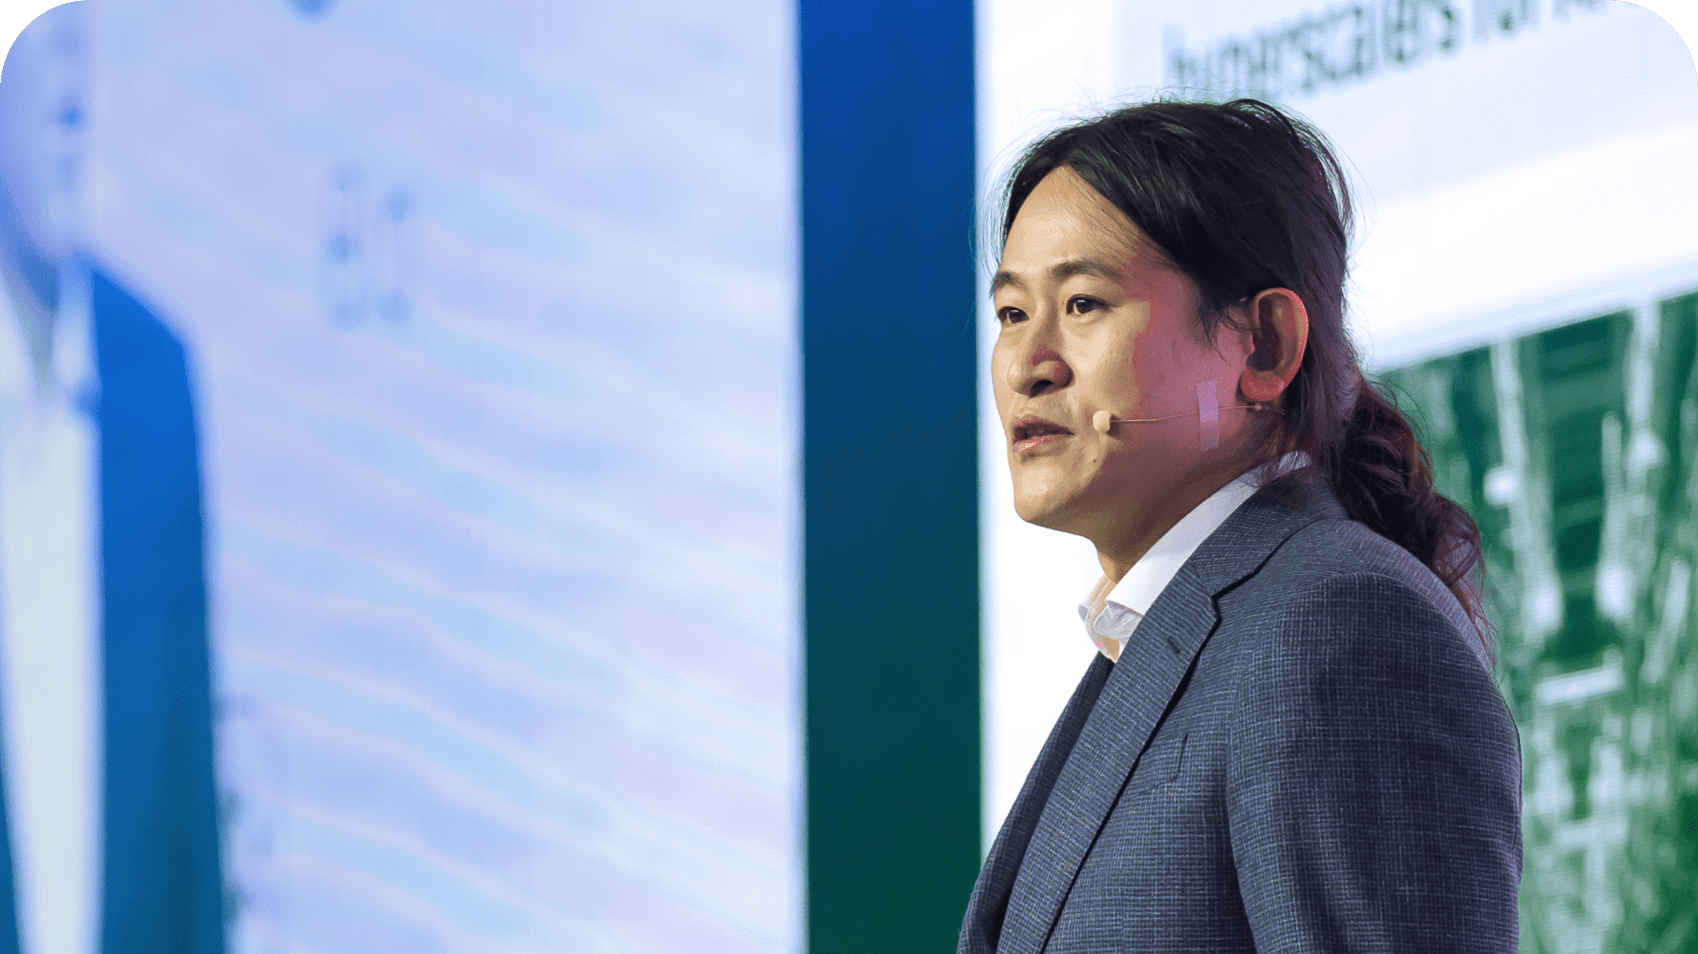 This video is June Paik and Jong-Ho Lee's Keynote 'Pushing the frontier of AI computing for a new world of possibilities' of Samsung Foundry Forum 2022 US